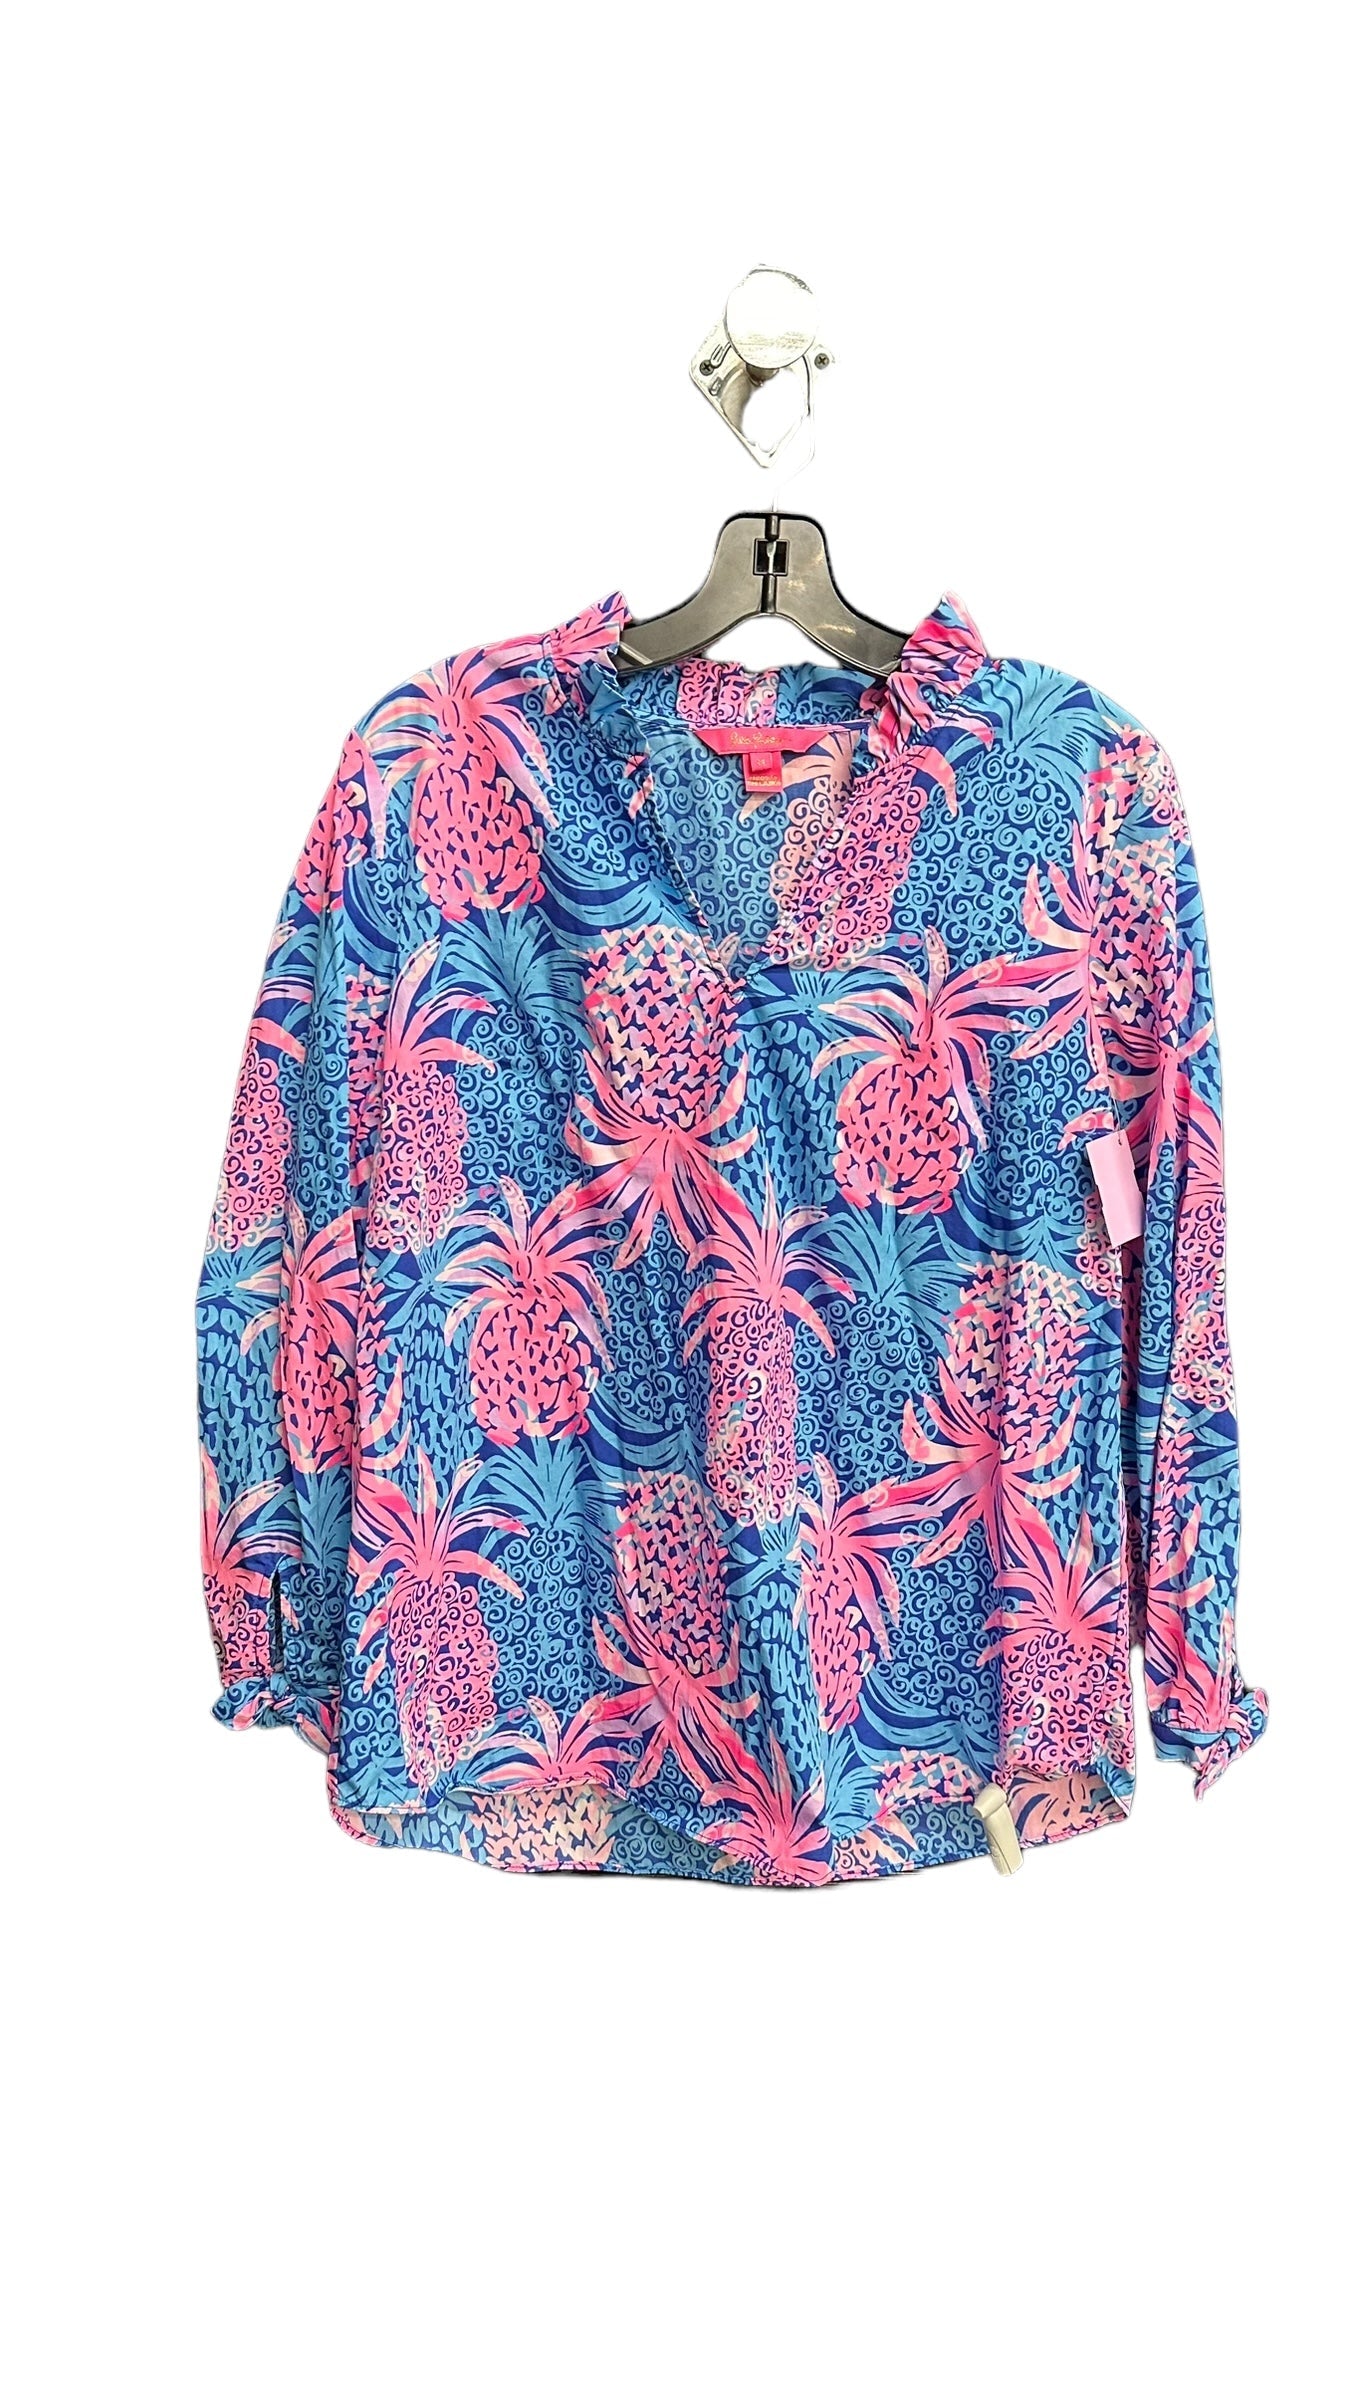 Blue & Pink Top Long Sleeve Lilly Pulitzer, Size M